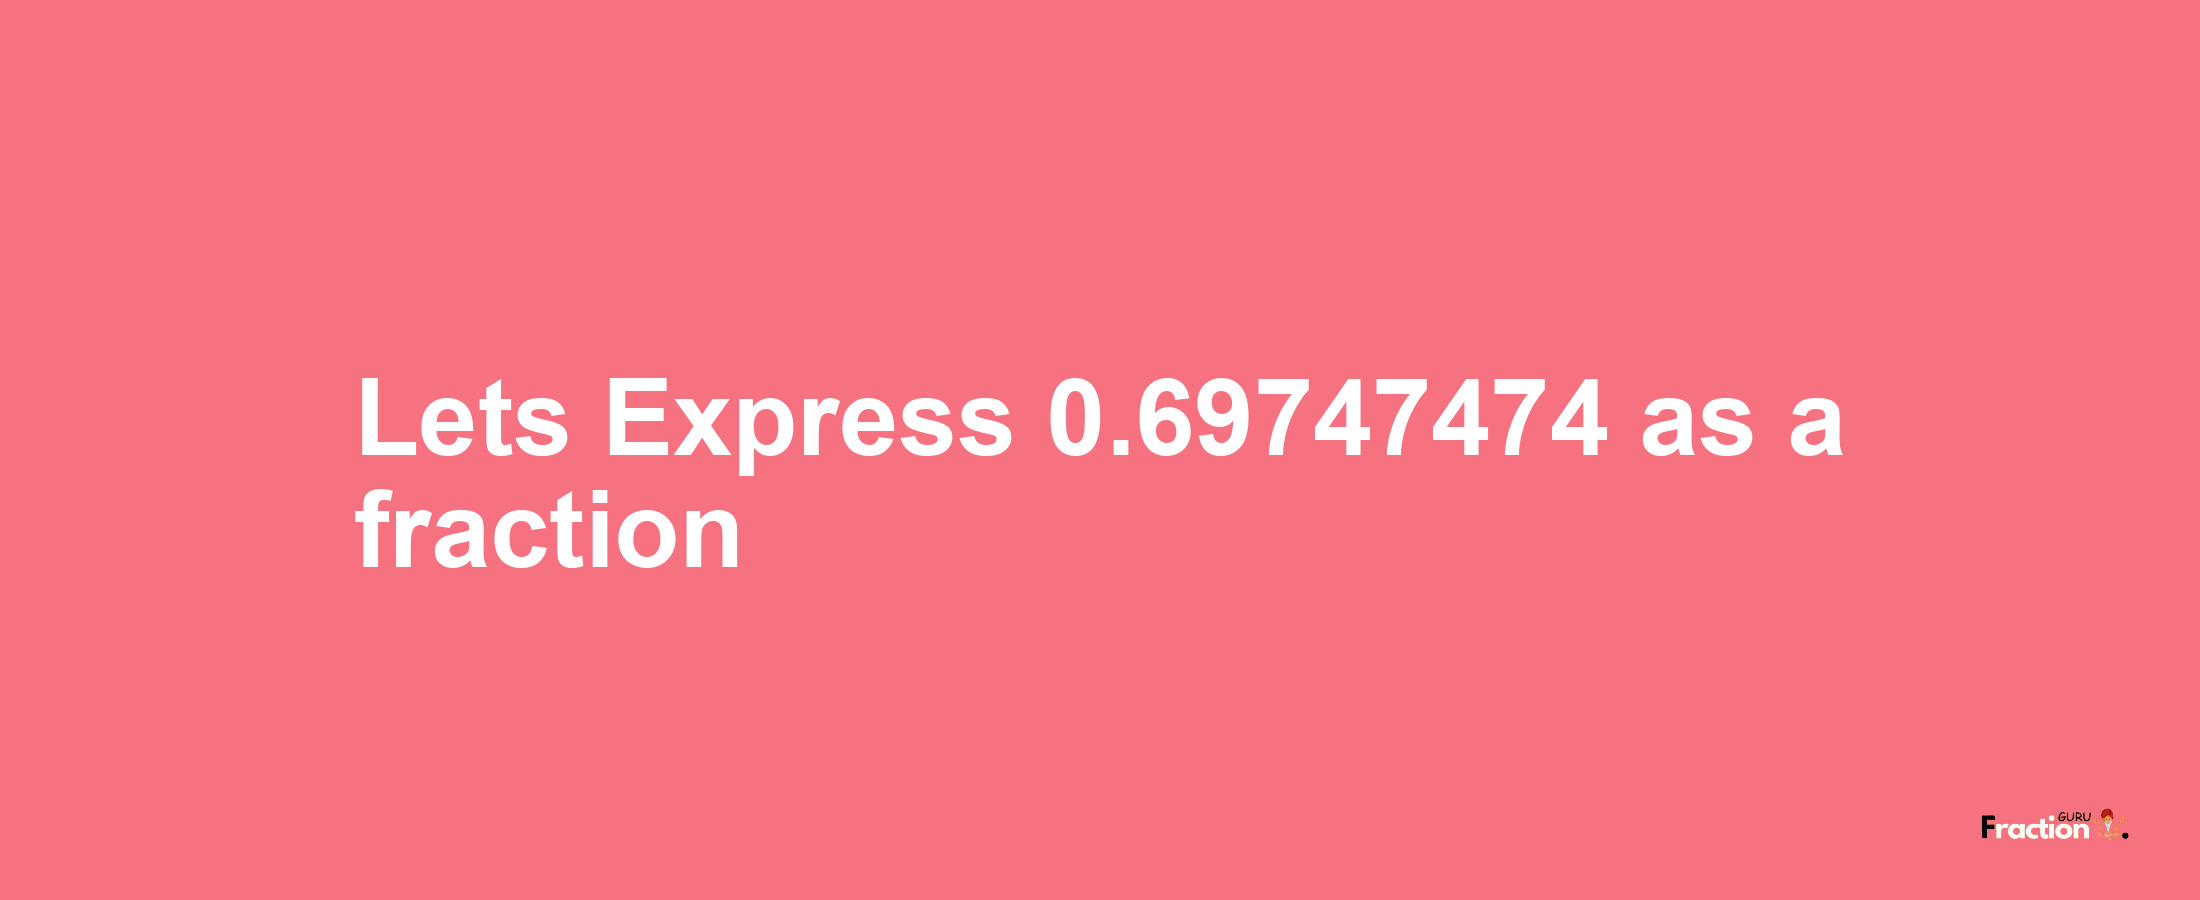 Lets Express 0.69747474 as afraction